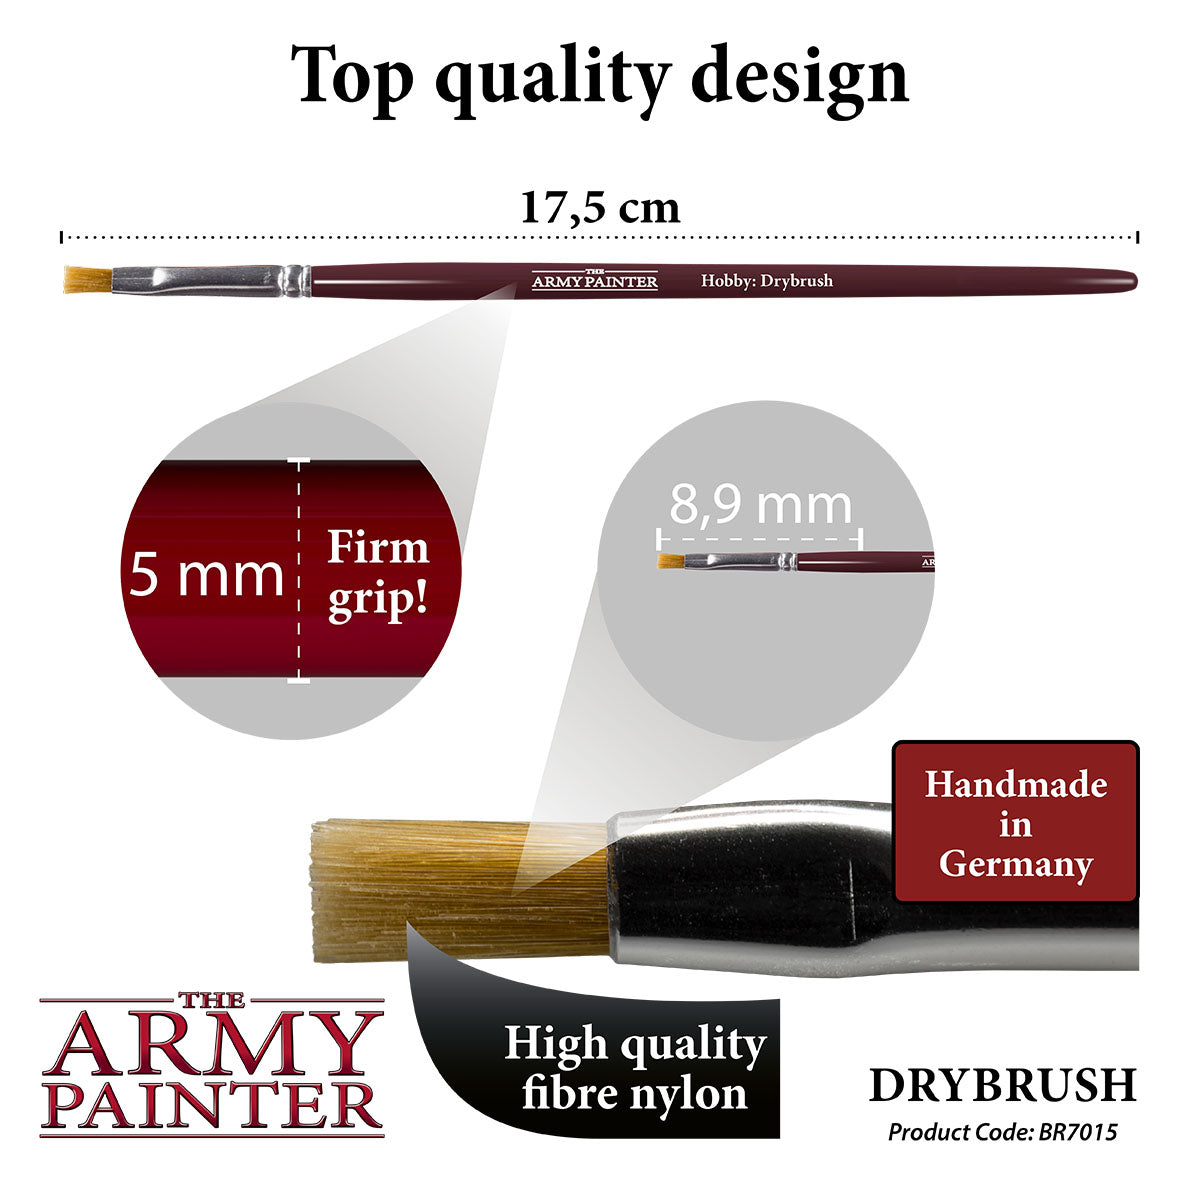 The Army Painter Masterclass Drybrush Pre-Order is Here!